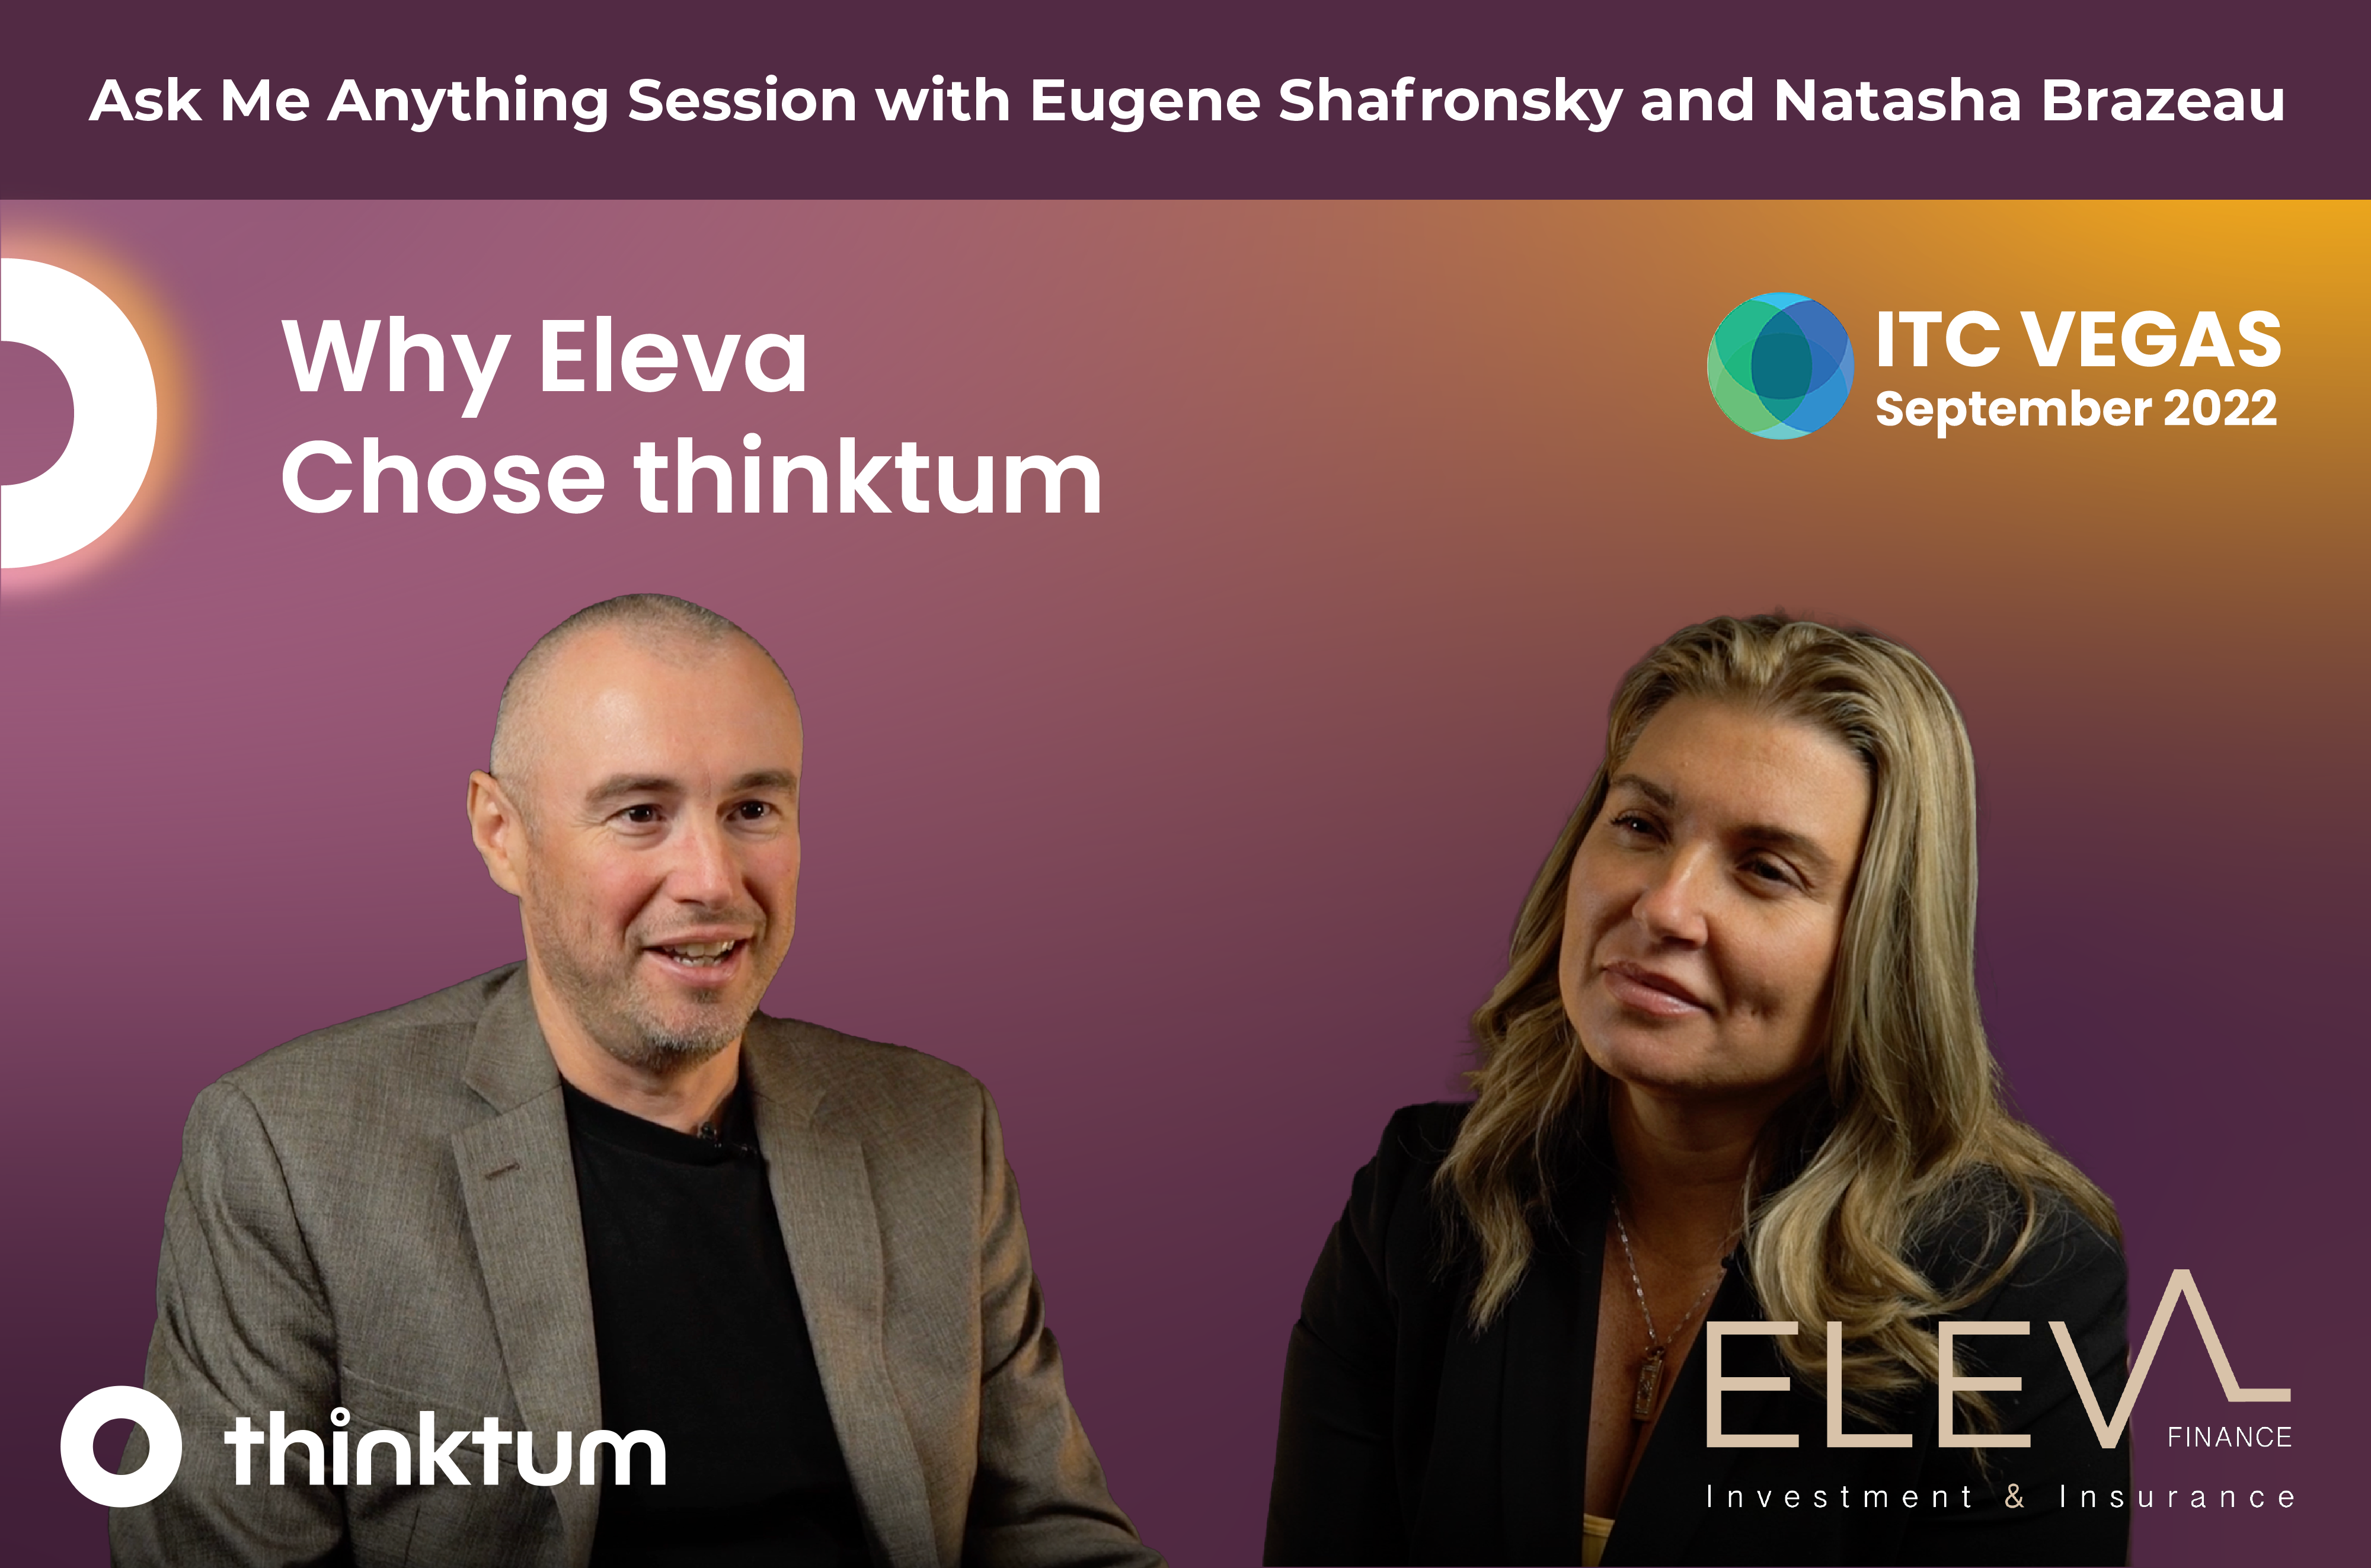 Ad for the Ask Me Anything session with thinktum's Eugene Shafronsky and Eleva Finance's CEO Natasha Brazeau titled Why Eleva Chose thinktum and the thinktum, Eleva Finance, and ITC Vegas 2022 logo.